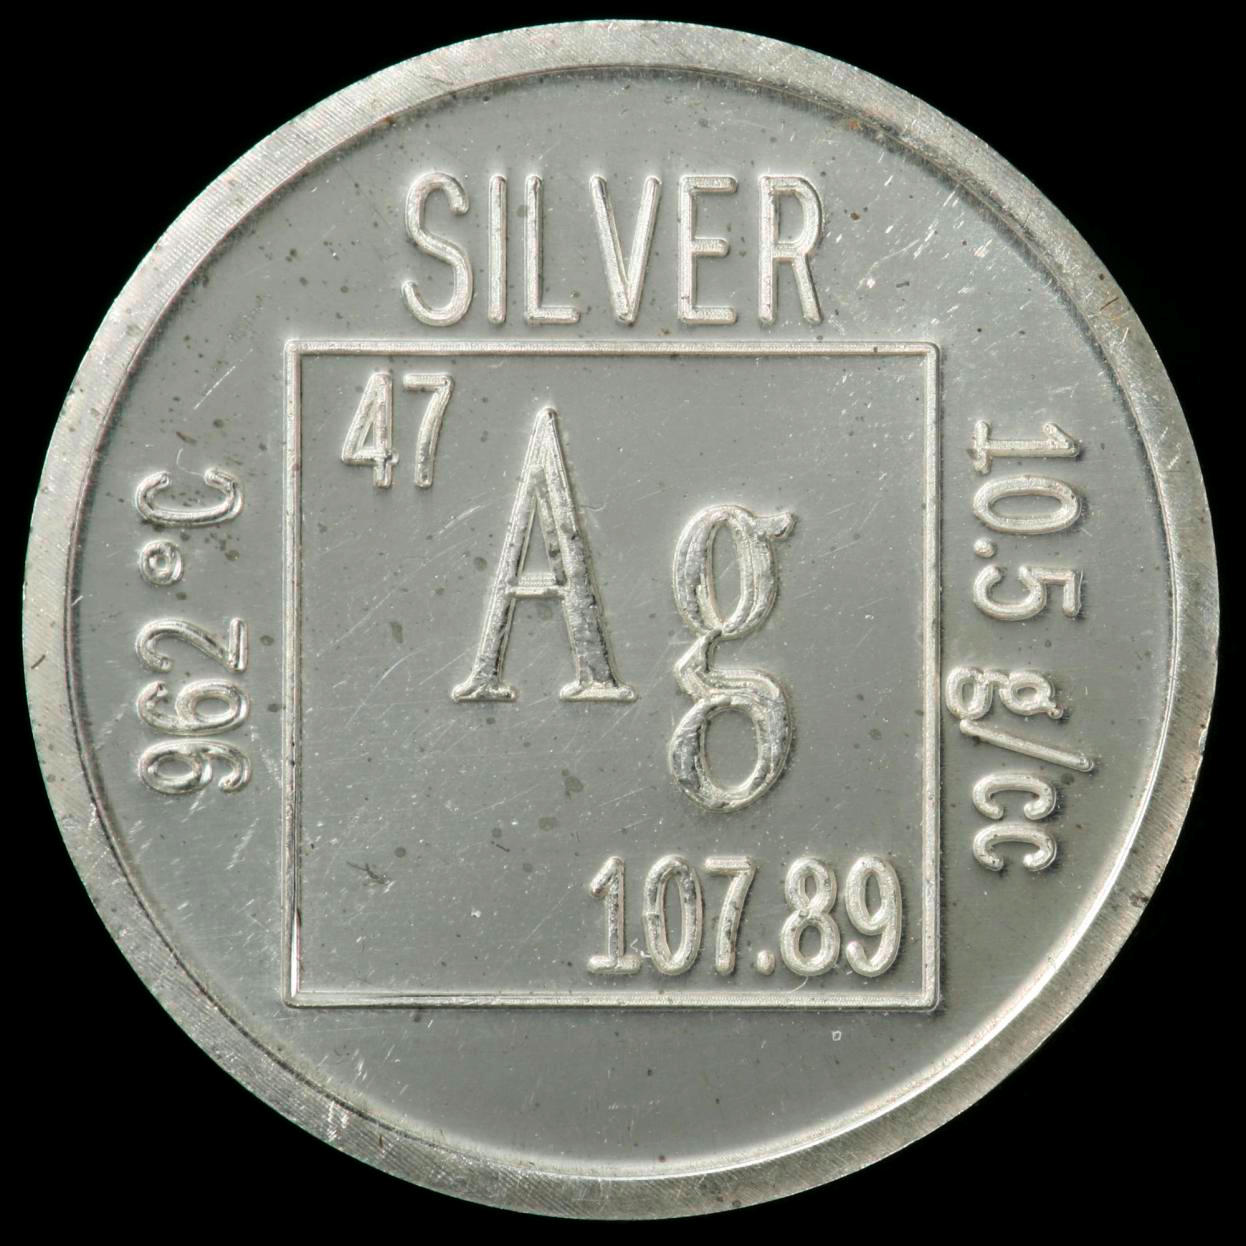 Silver Element coin